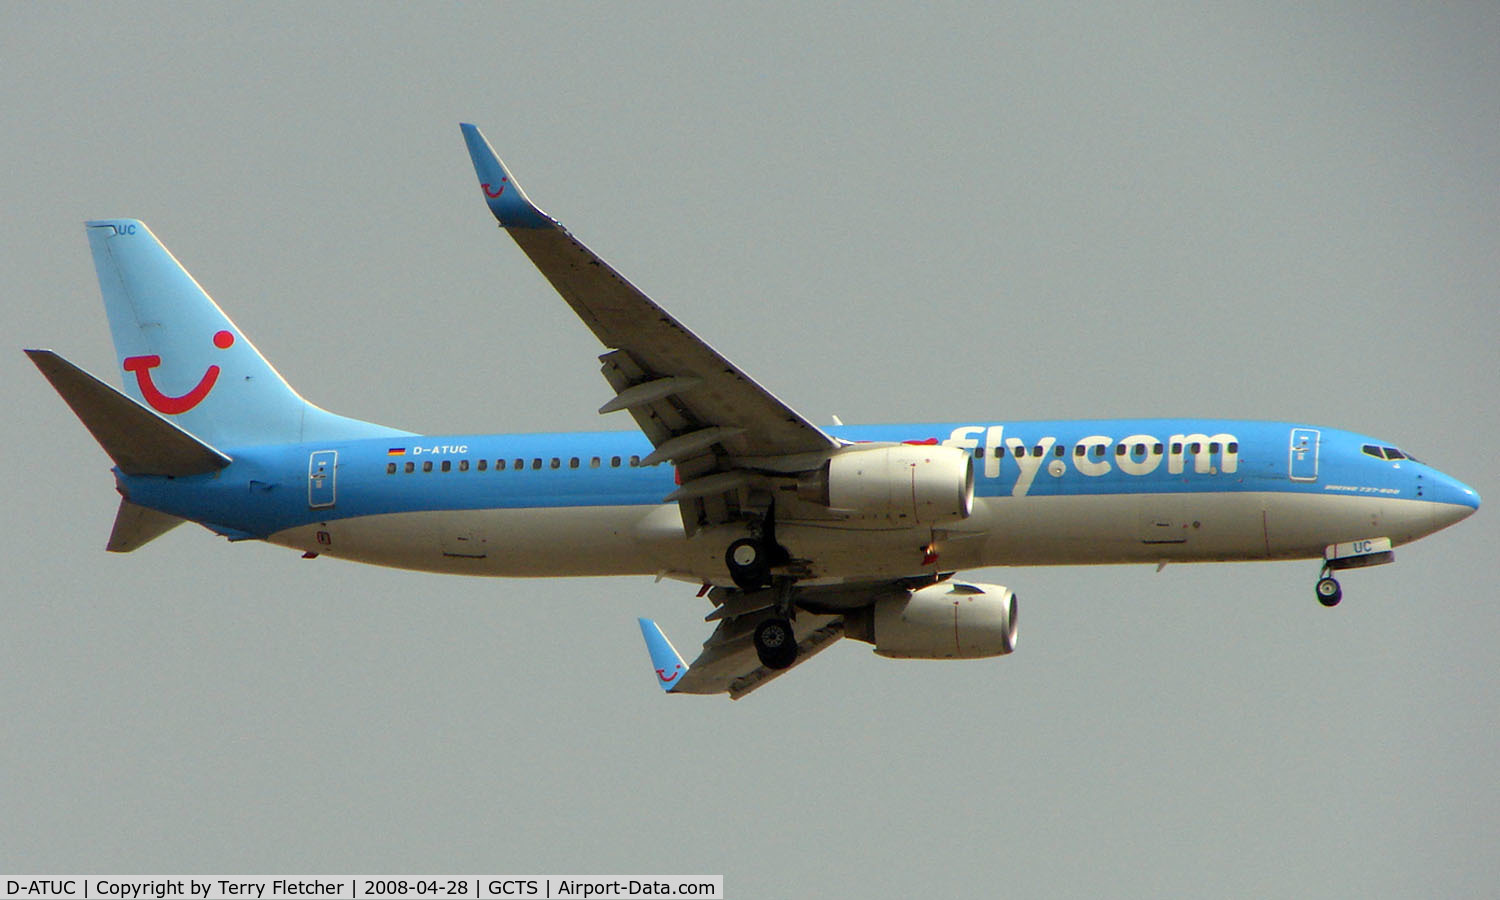 D-ATUC, 2006 Boeing 737-8K5 C/N 34684, TUI B737 on approach to Tenerife South